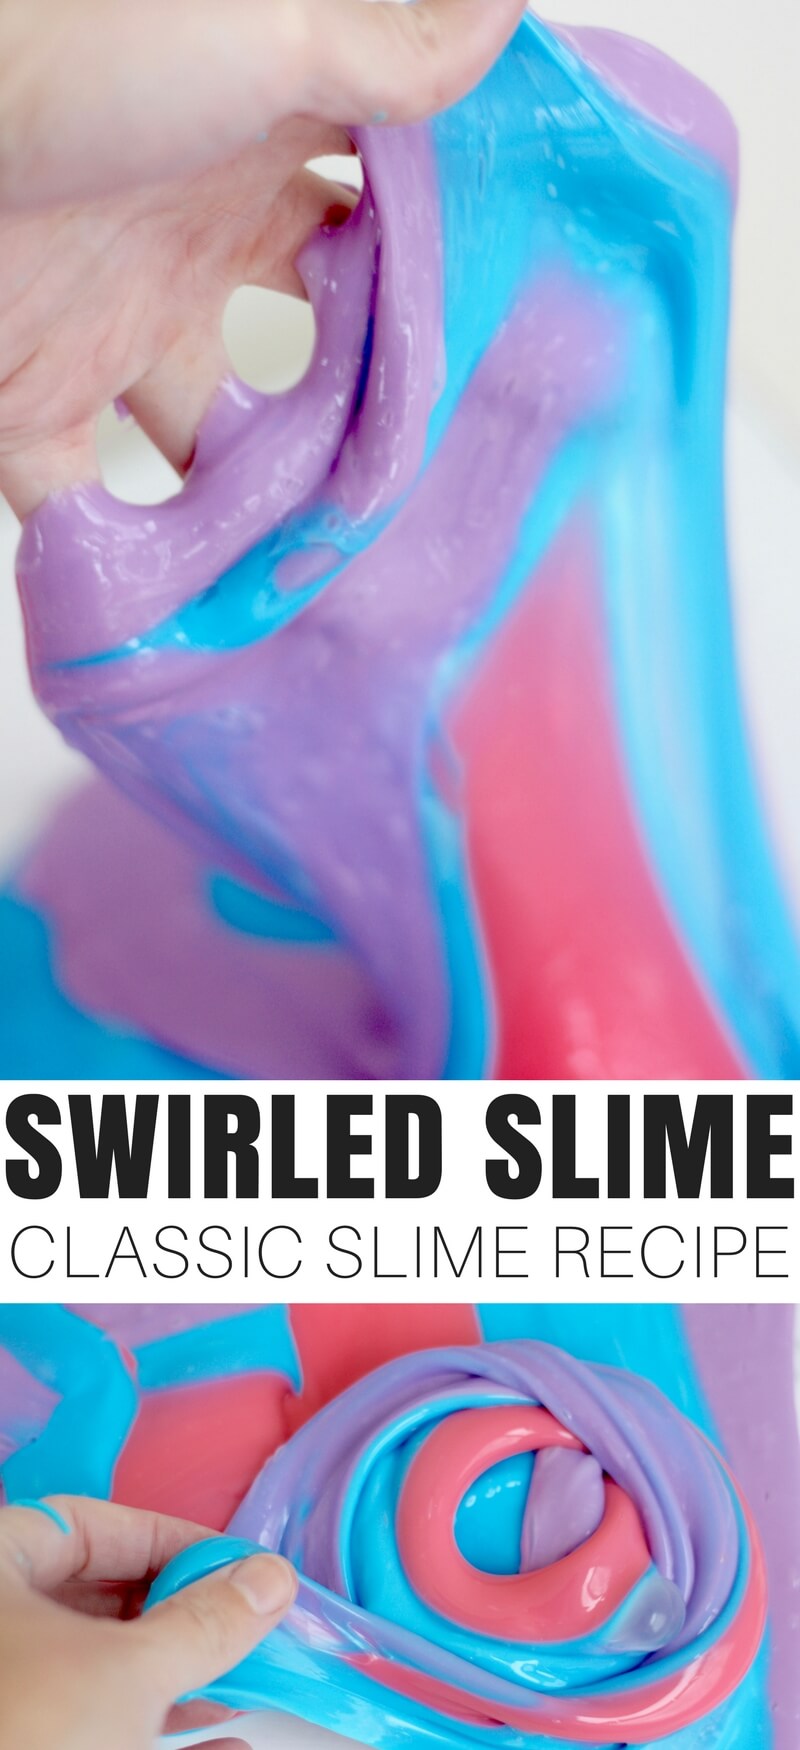 The classic slime is the borax slime recipe! Used for years, this slime making gem of a recipe makes the most amazing stretchy, squishy slime once you find the correct ratio. We think we have, and we want to share it with you. Try this classic homemade slime recipe the next time you want to make homemade slime.